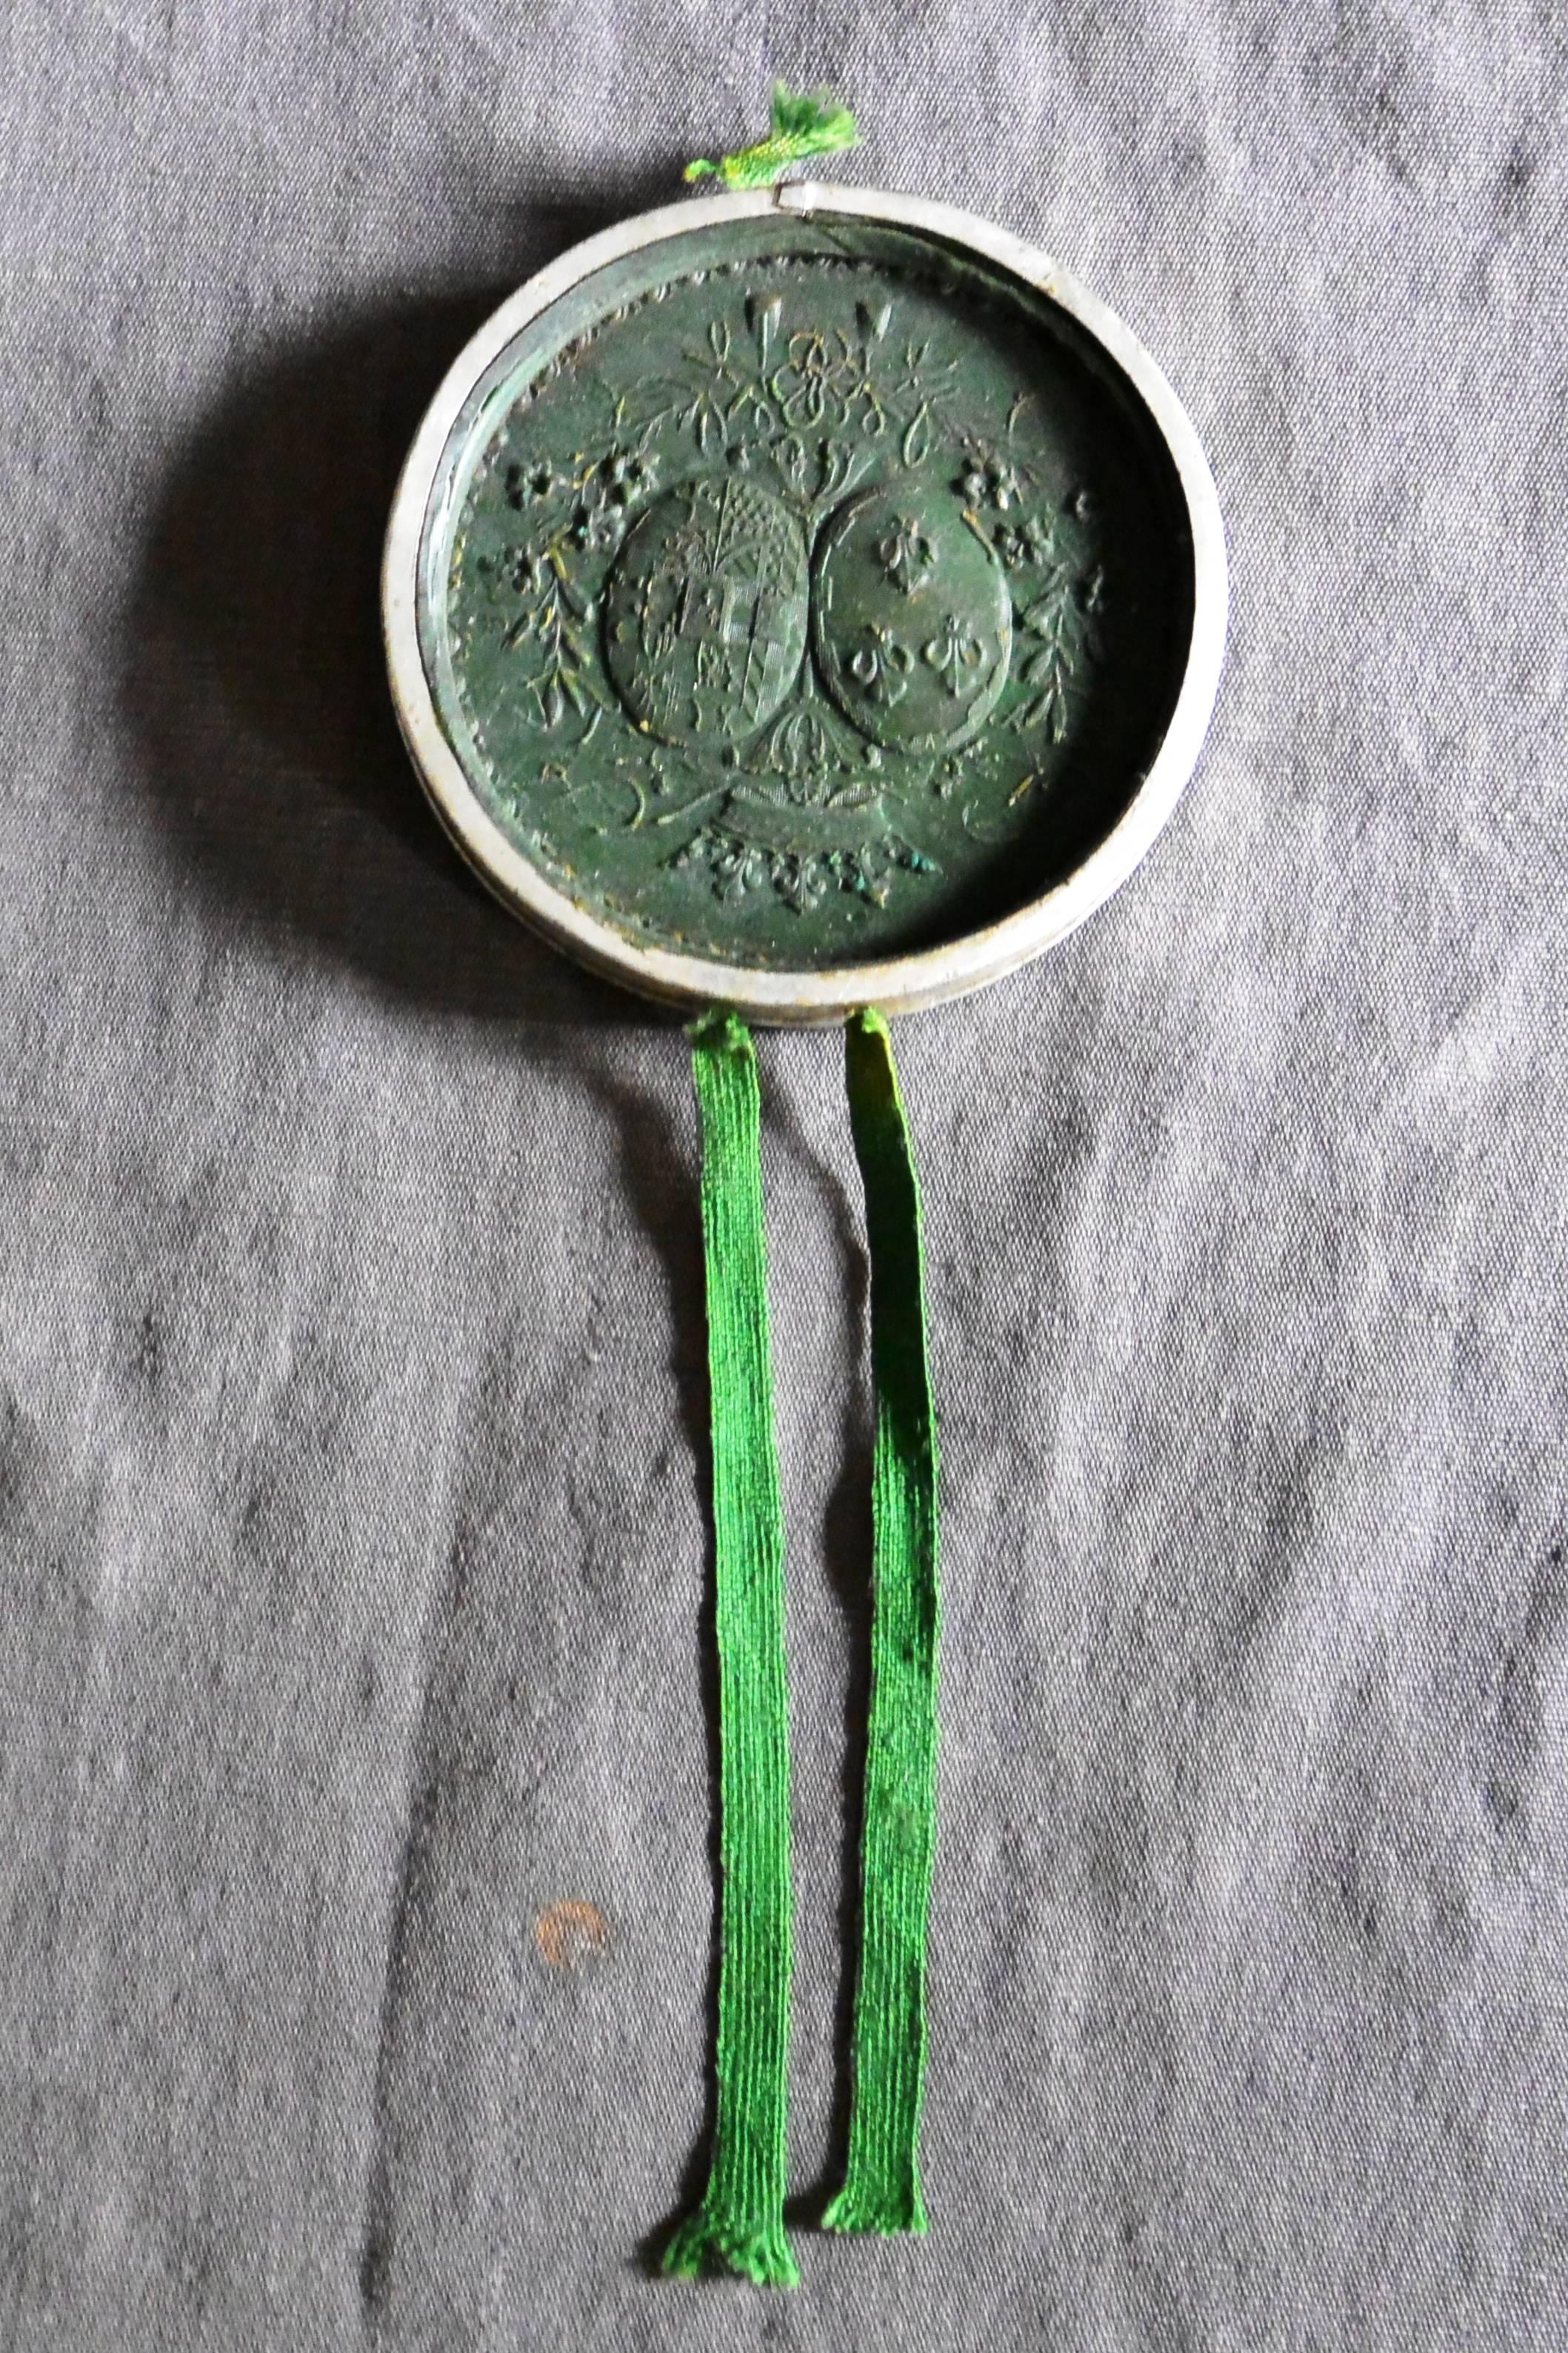 The Duchesse De Berry's wax seal. Dark green wax impression of the Duchess's royal coat of arms contained within it's original tin case with green ribbons; the exterior inscribed: Duchesse de Berry, France, circa 1816
Dimension: 3.88